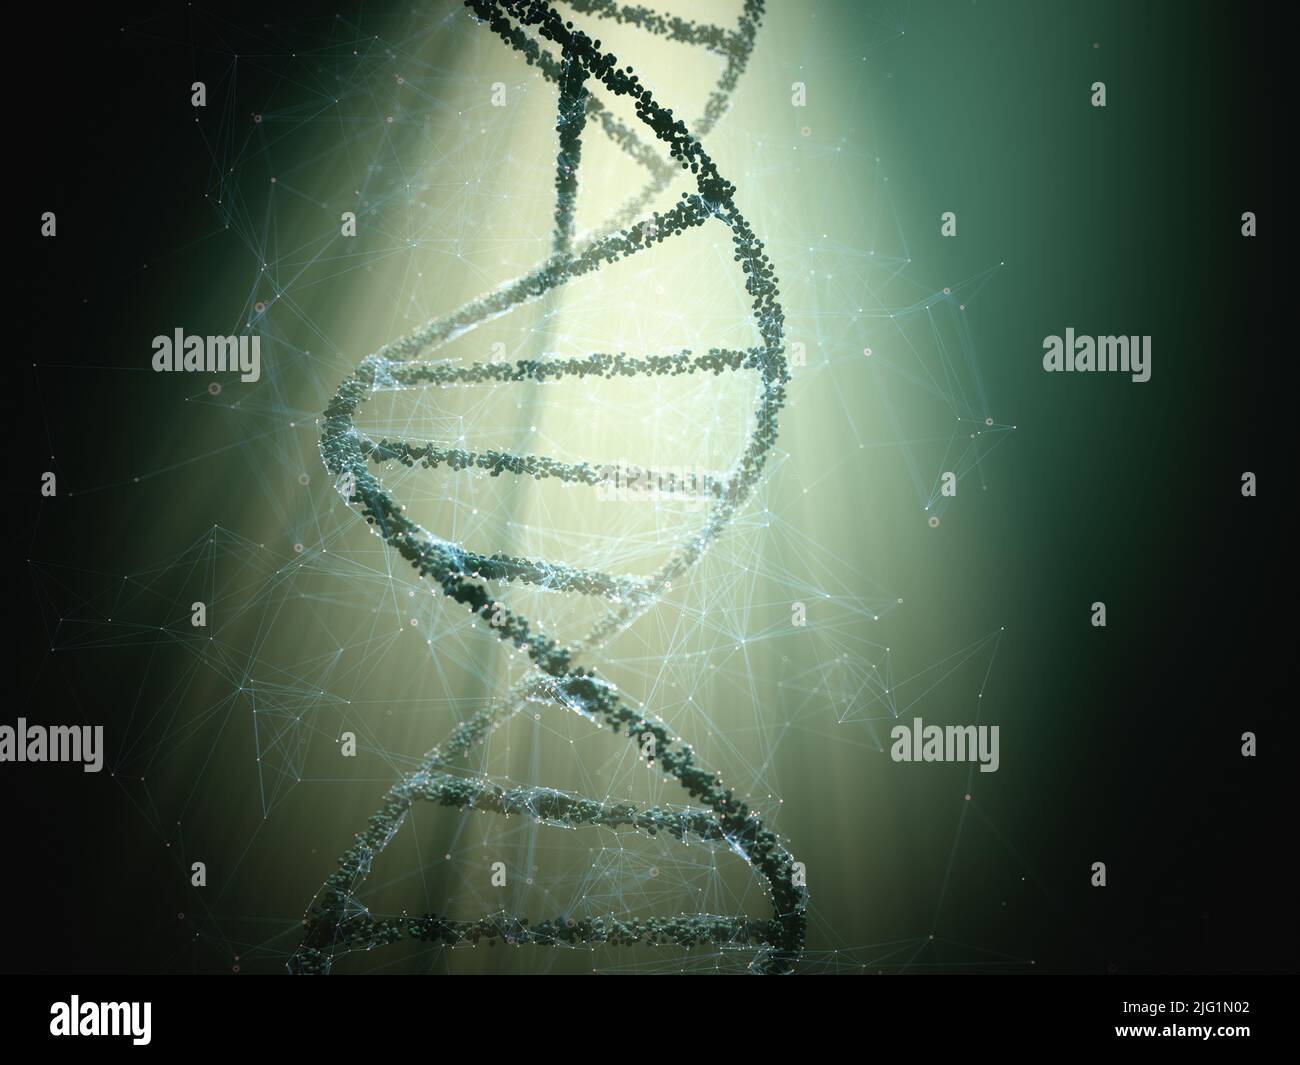 Biotechnology and molecular genetic engineering. 3D illustration of science and molecular technology. Stock Photo